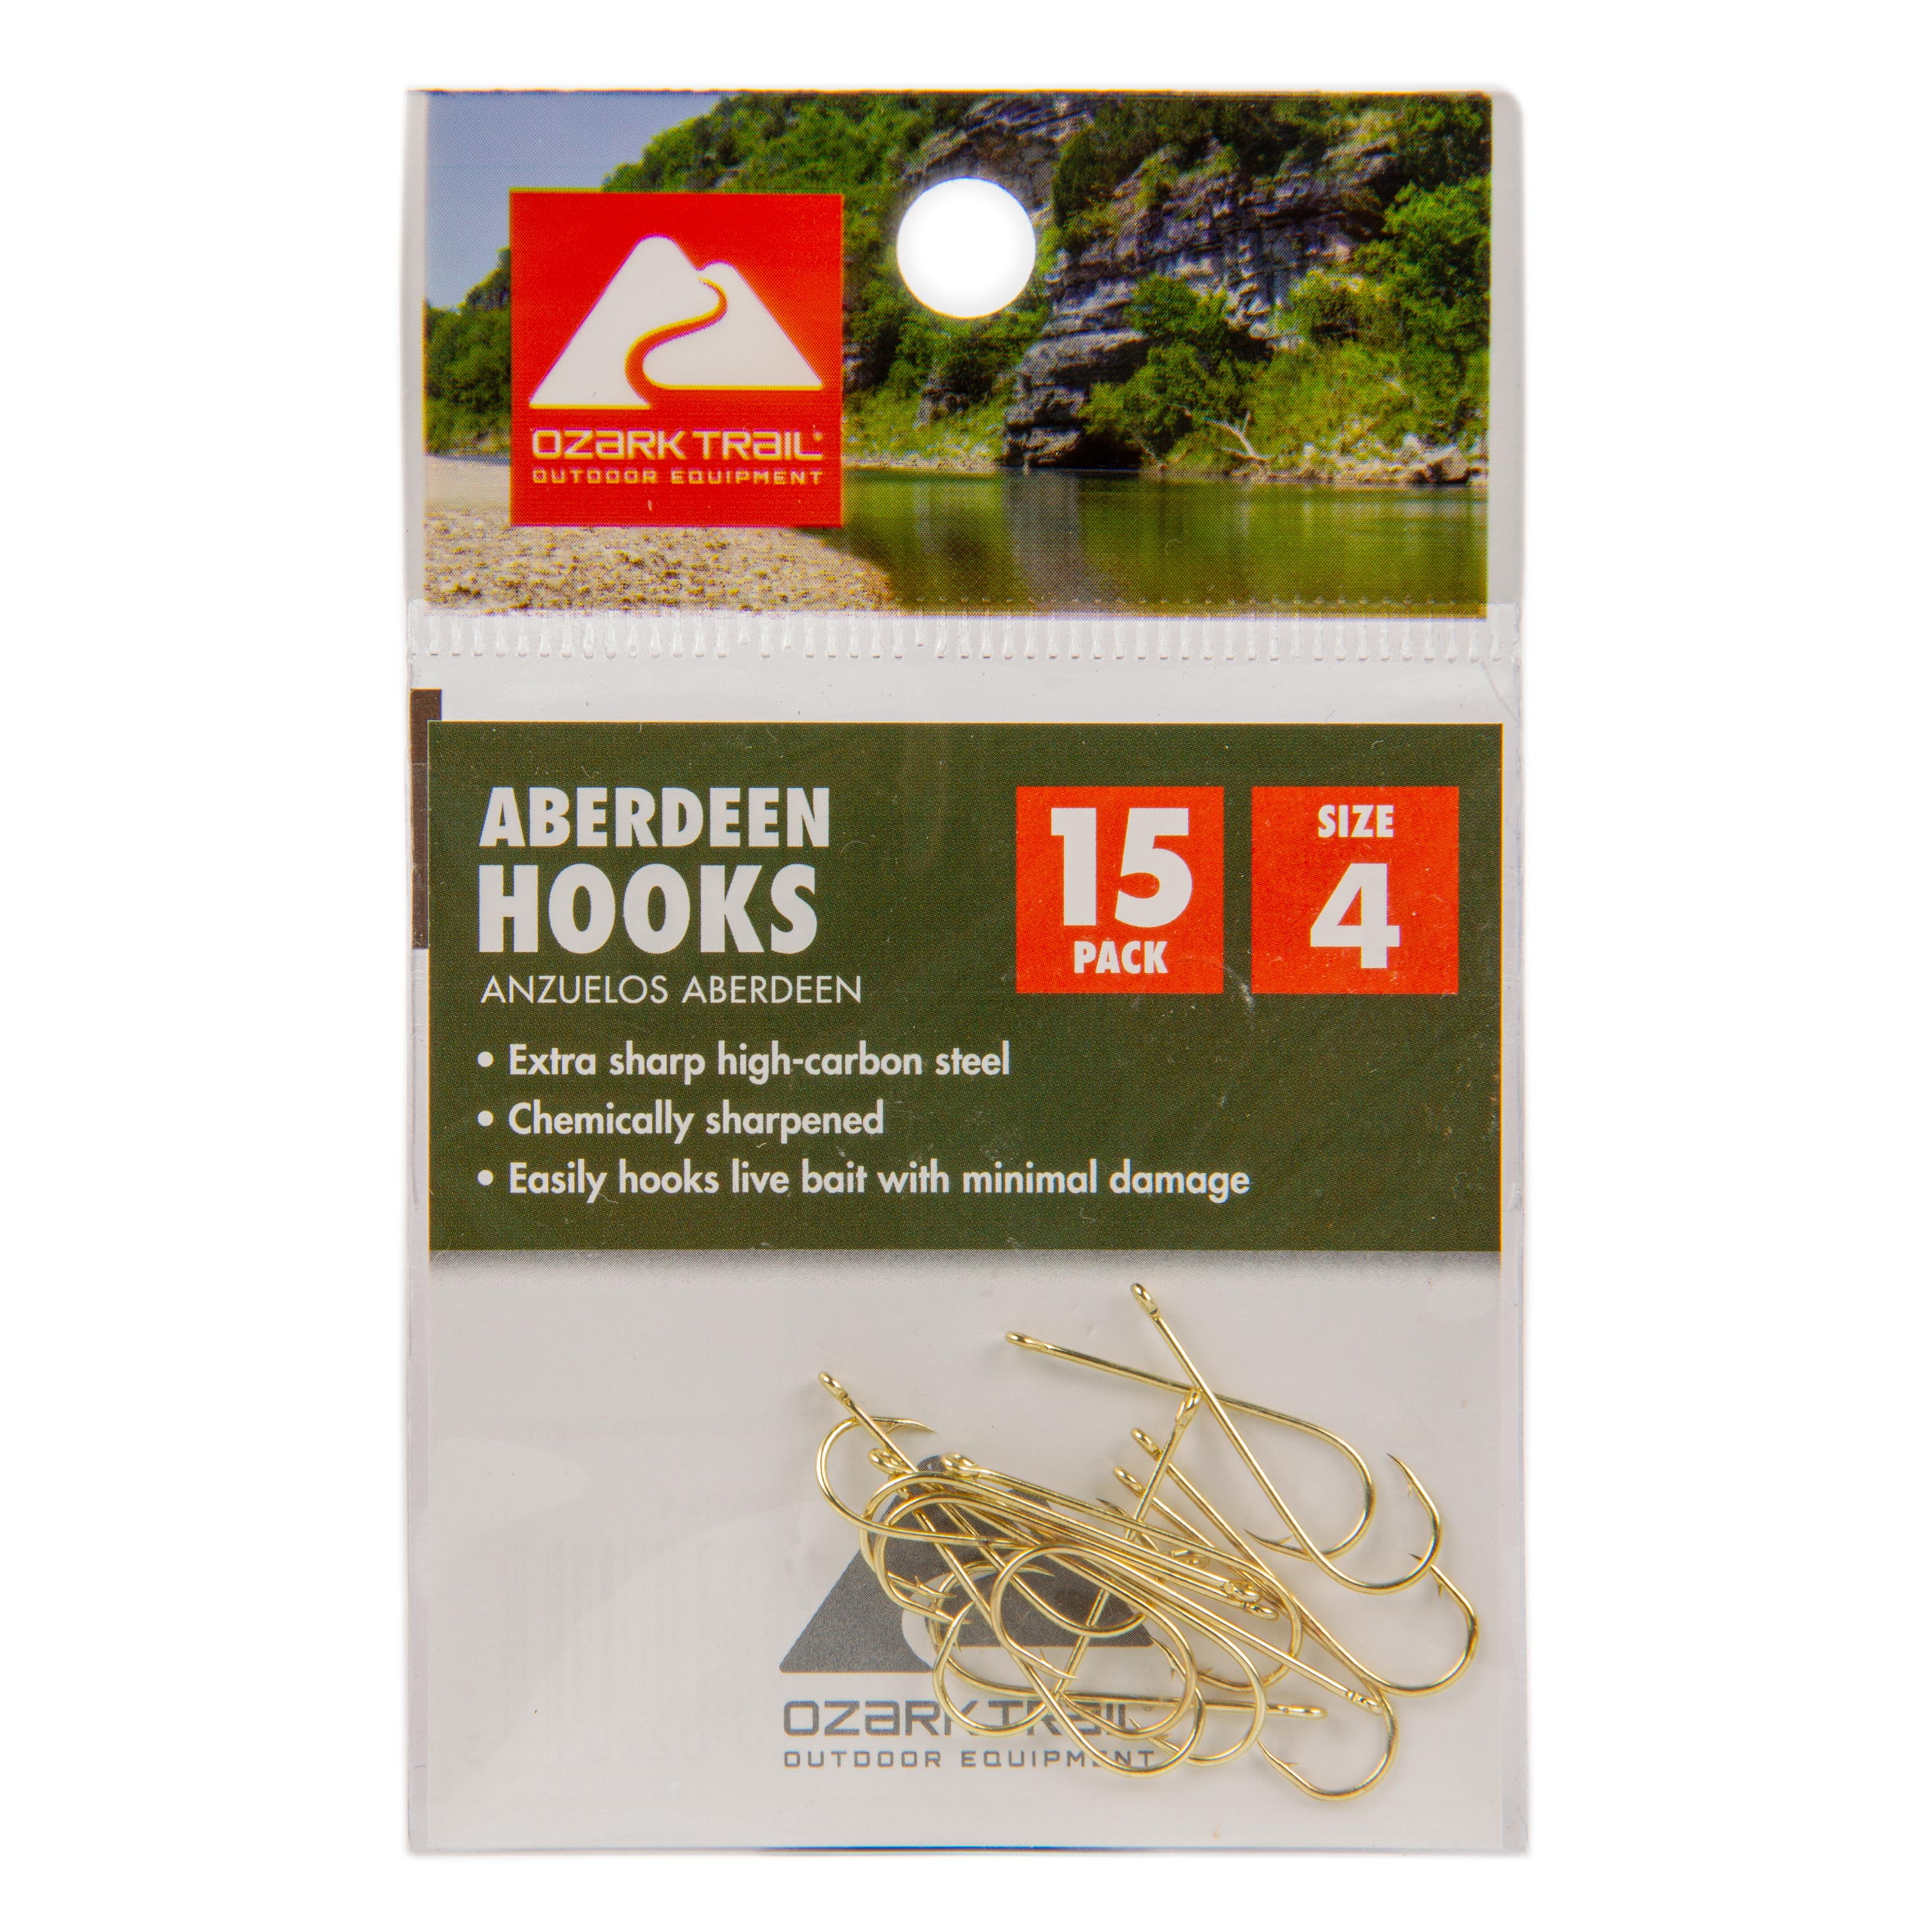 ABERDEEN bend hooks sizes 6 to 6/0 - over 200 hooks